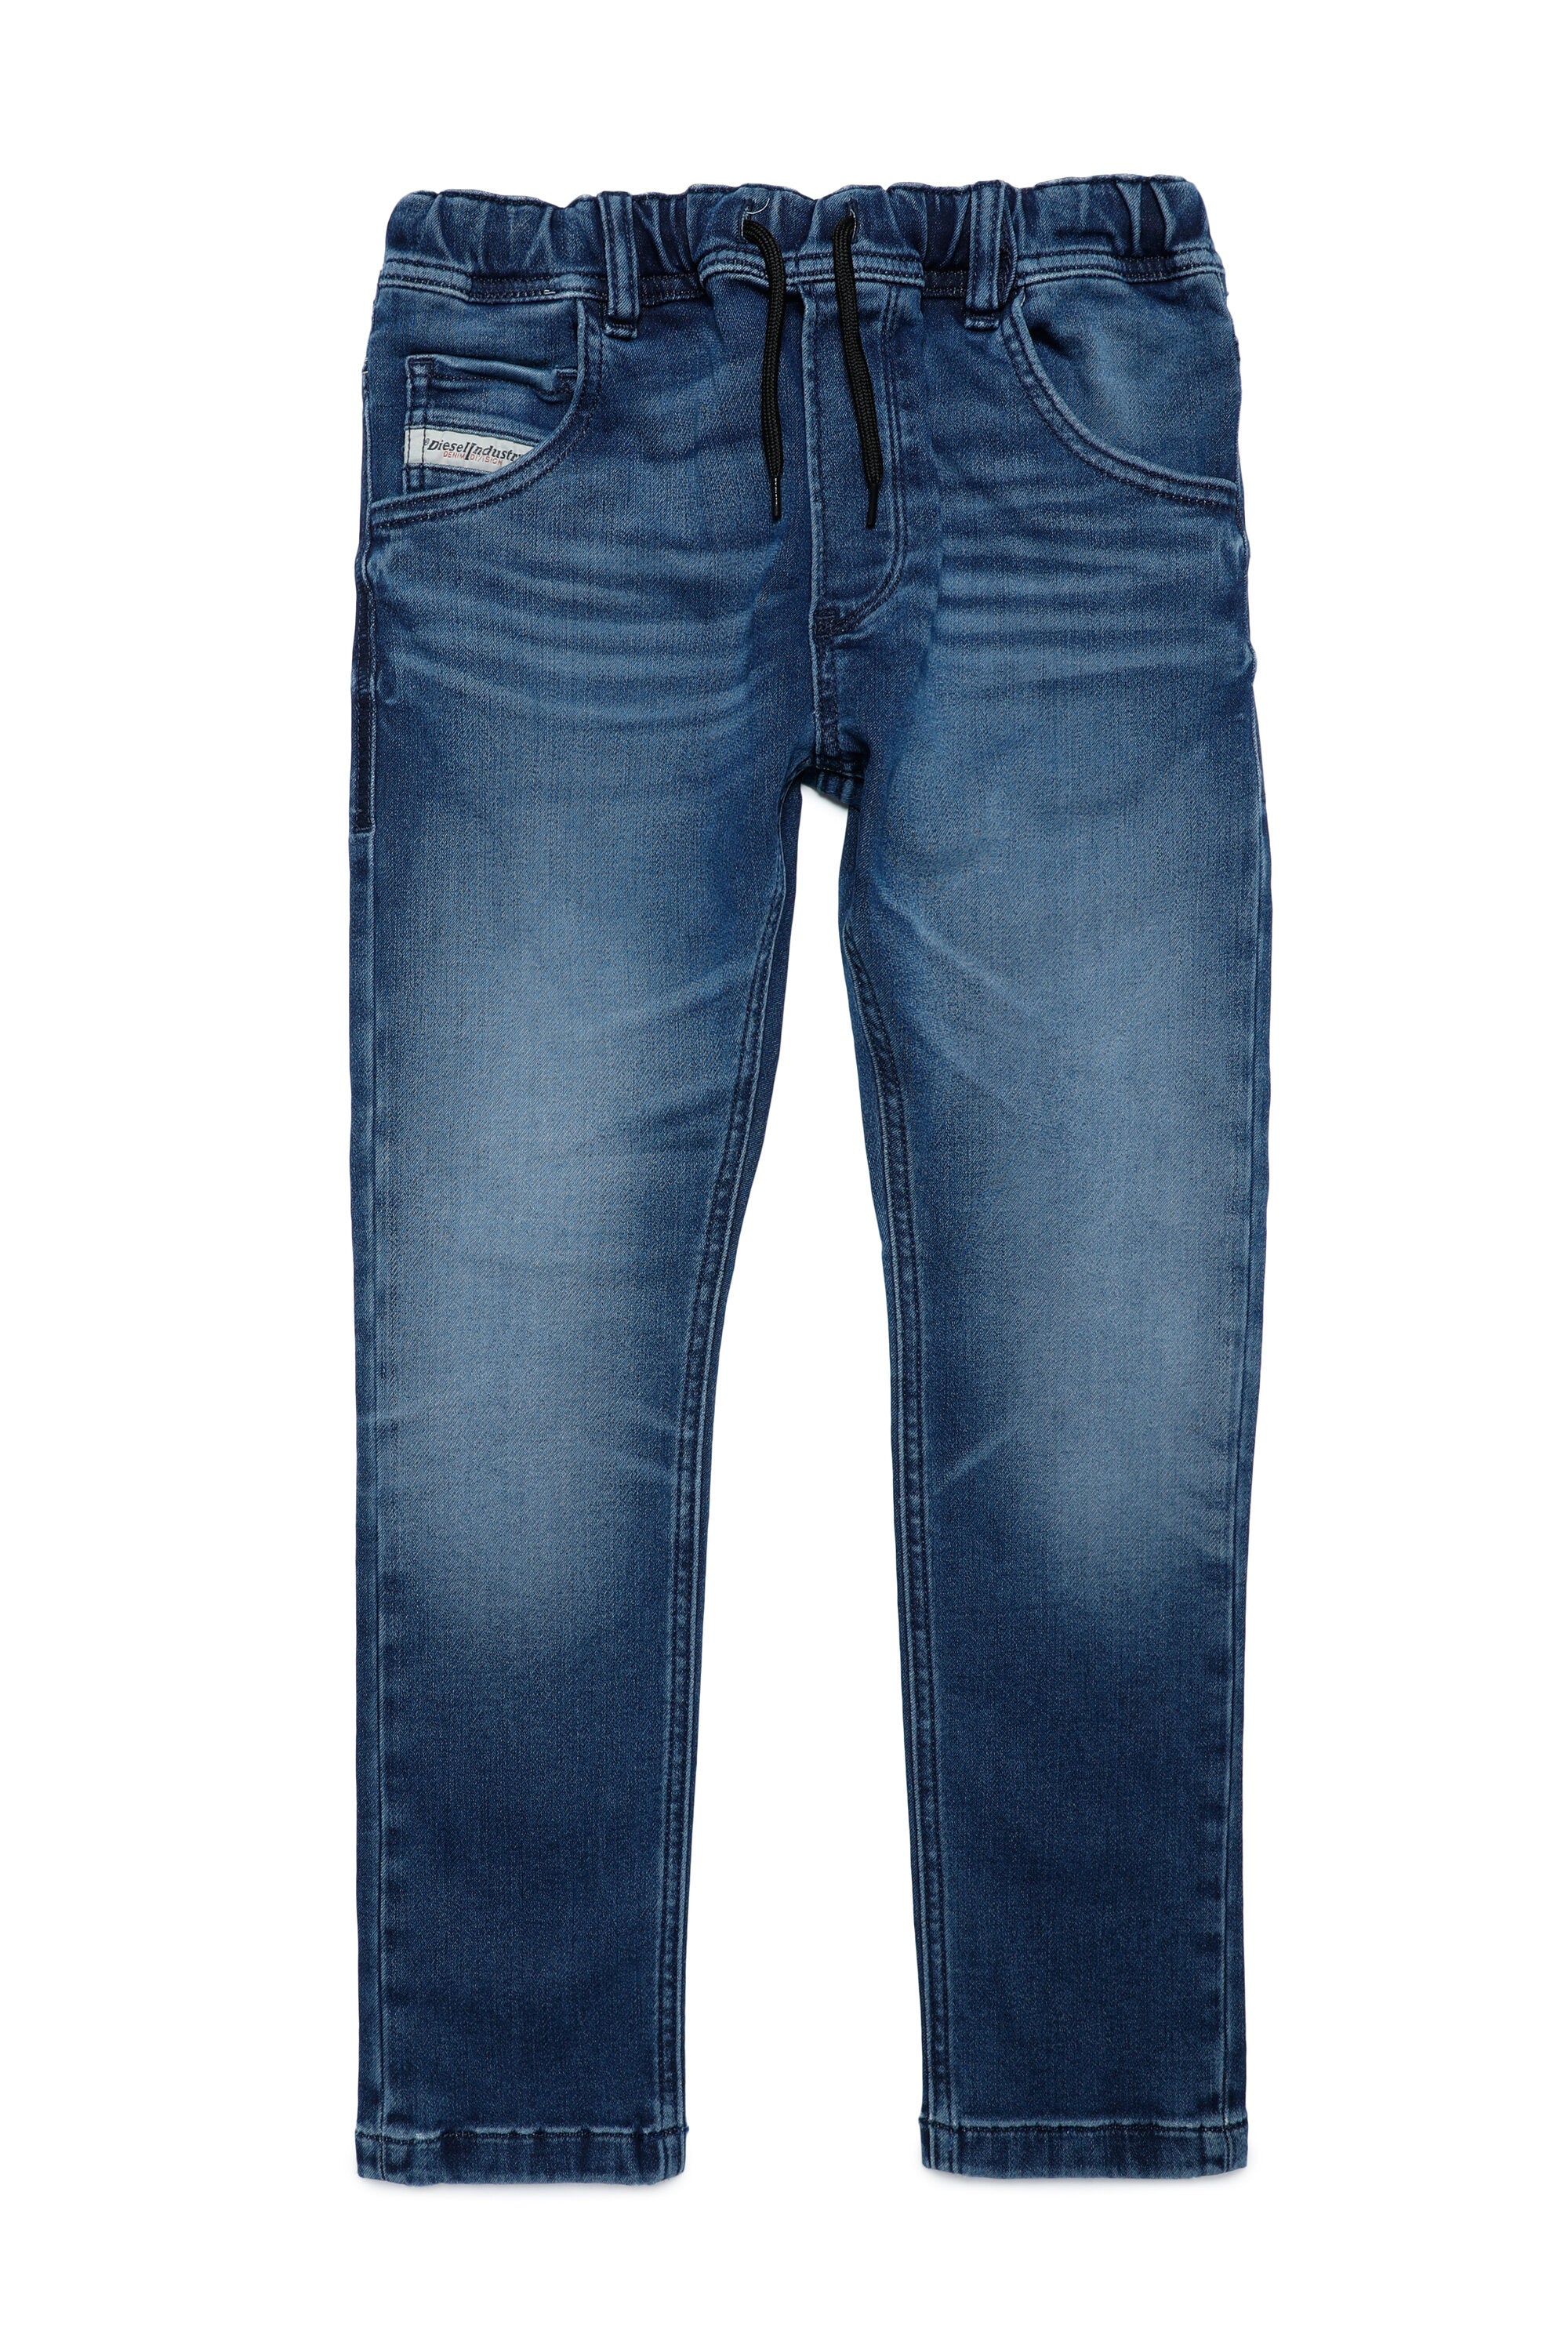 JoggJeans® Krooley tapered blue with shades